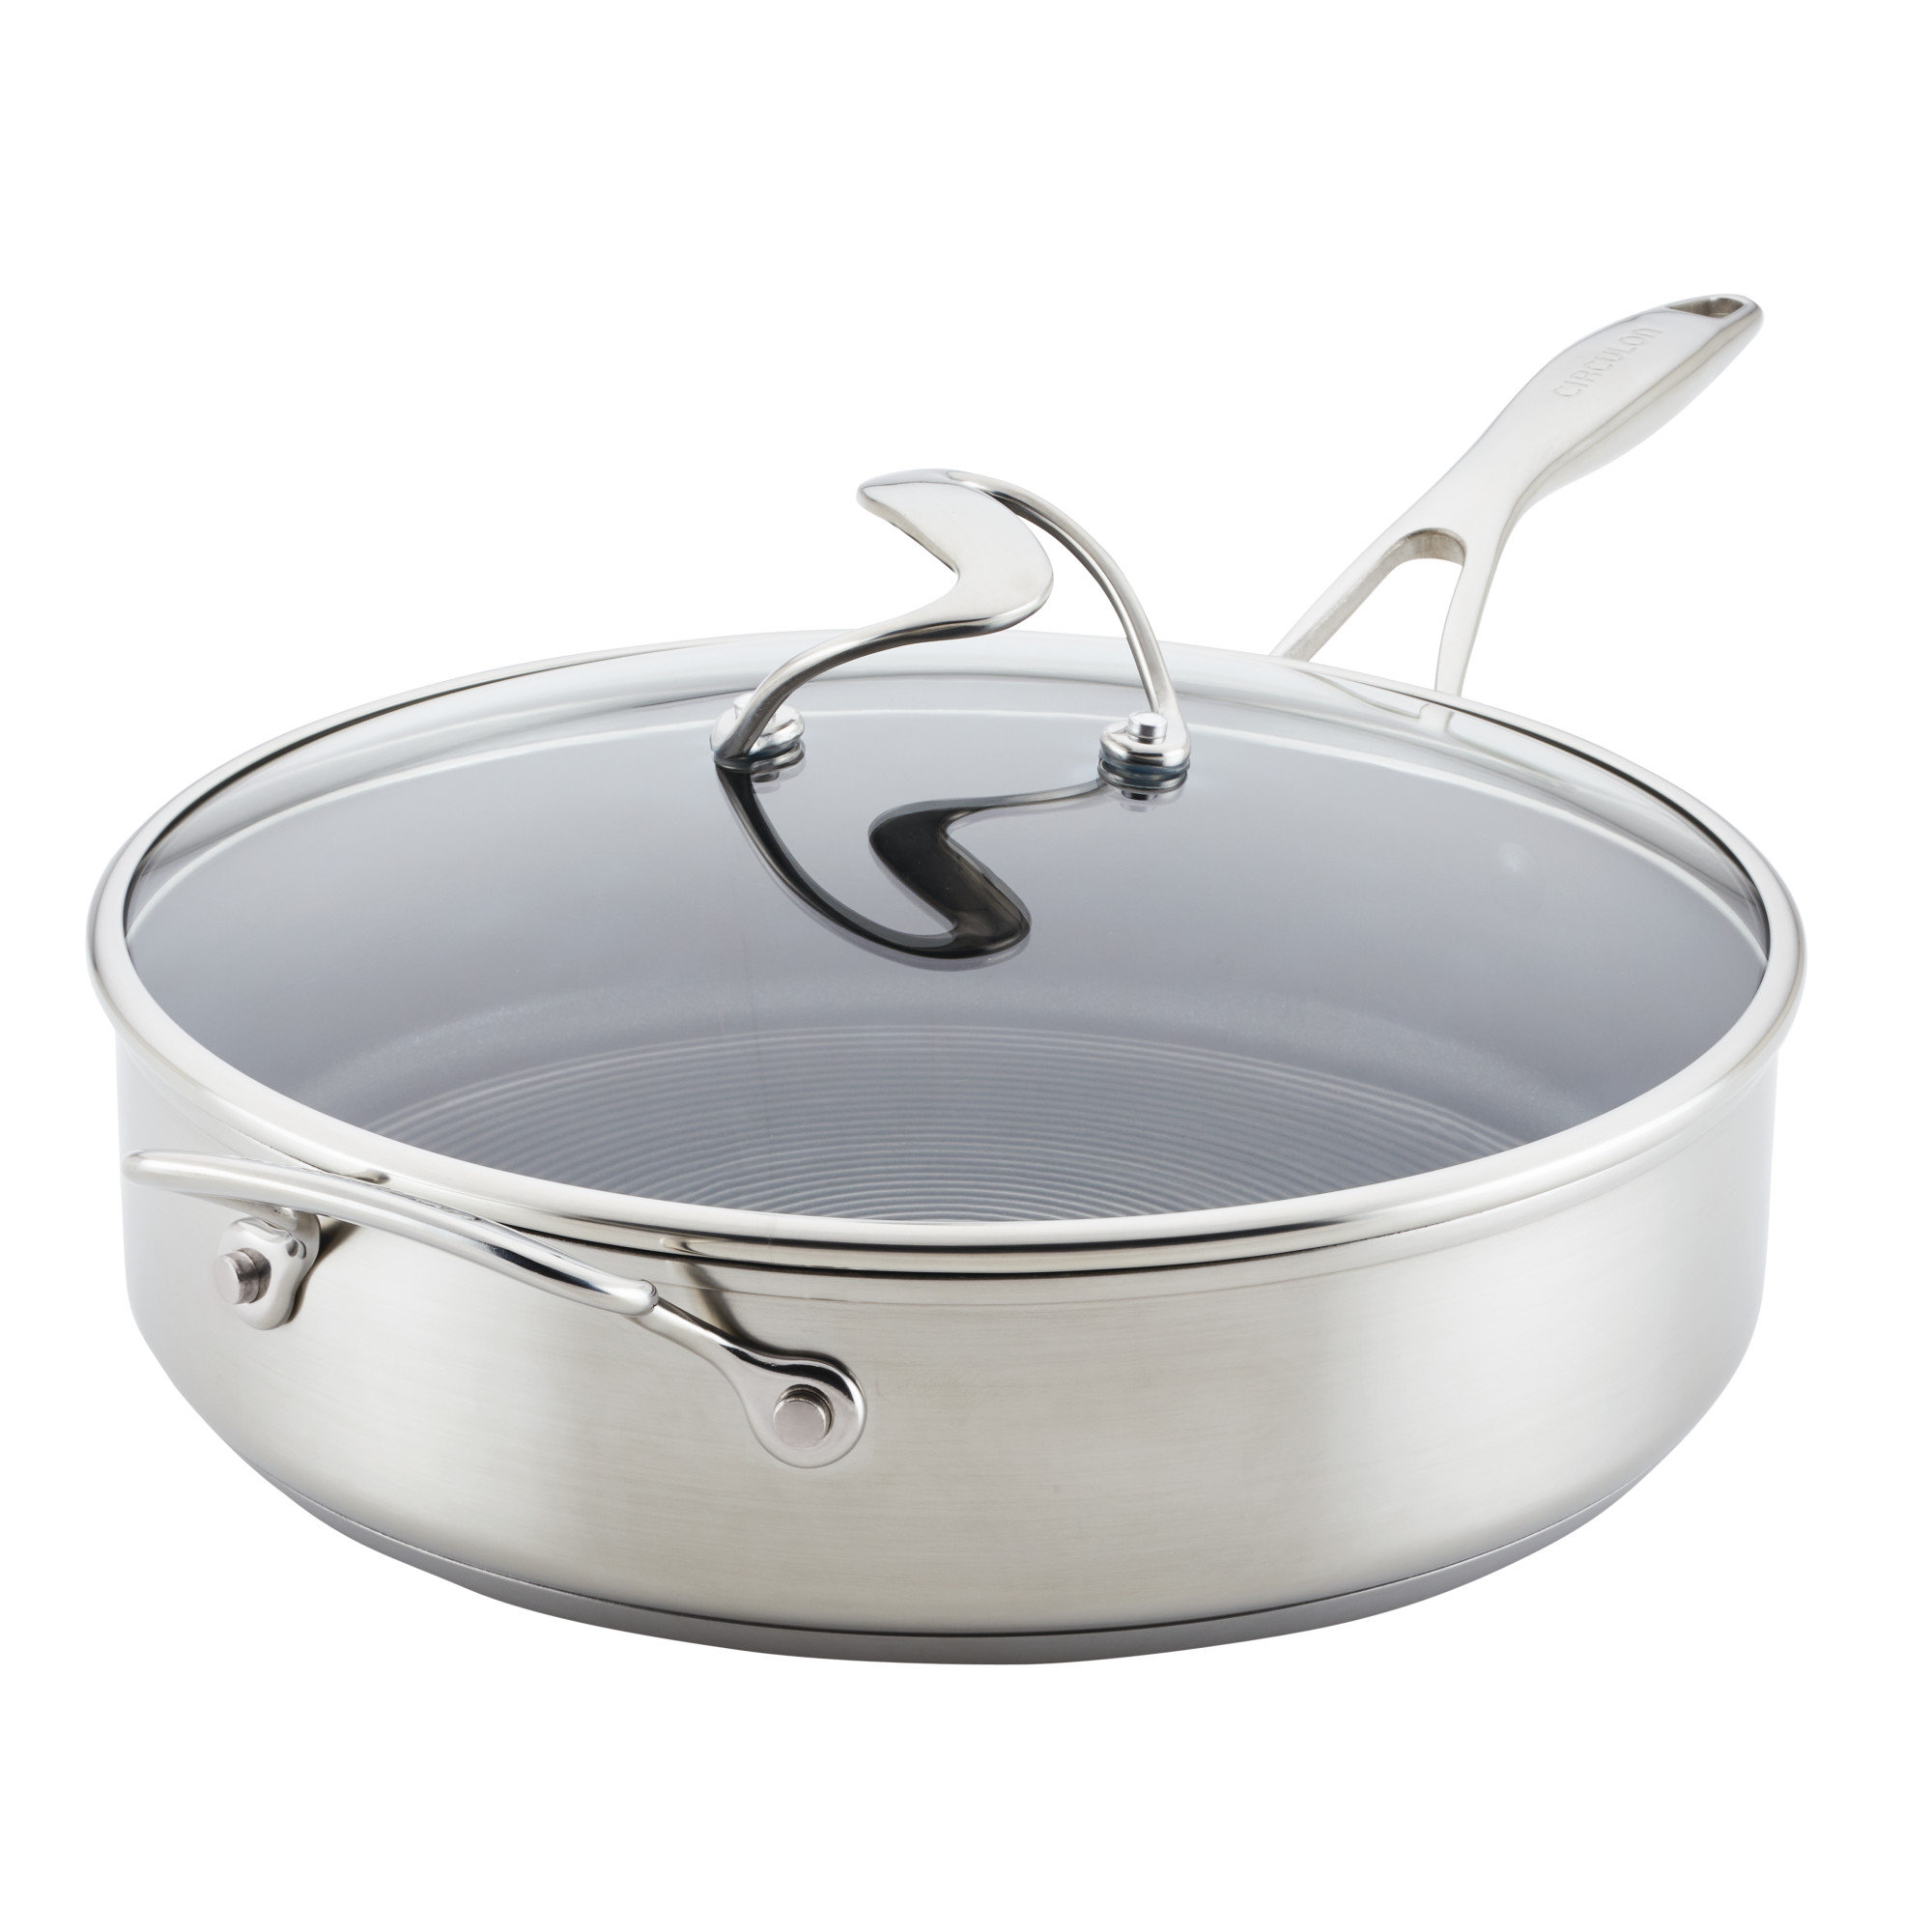 Circulon SteelShield Stainless Steel 4-Qt. Saucepot with Lid, Silver